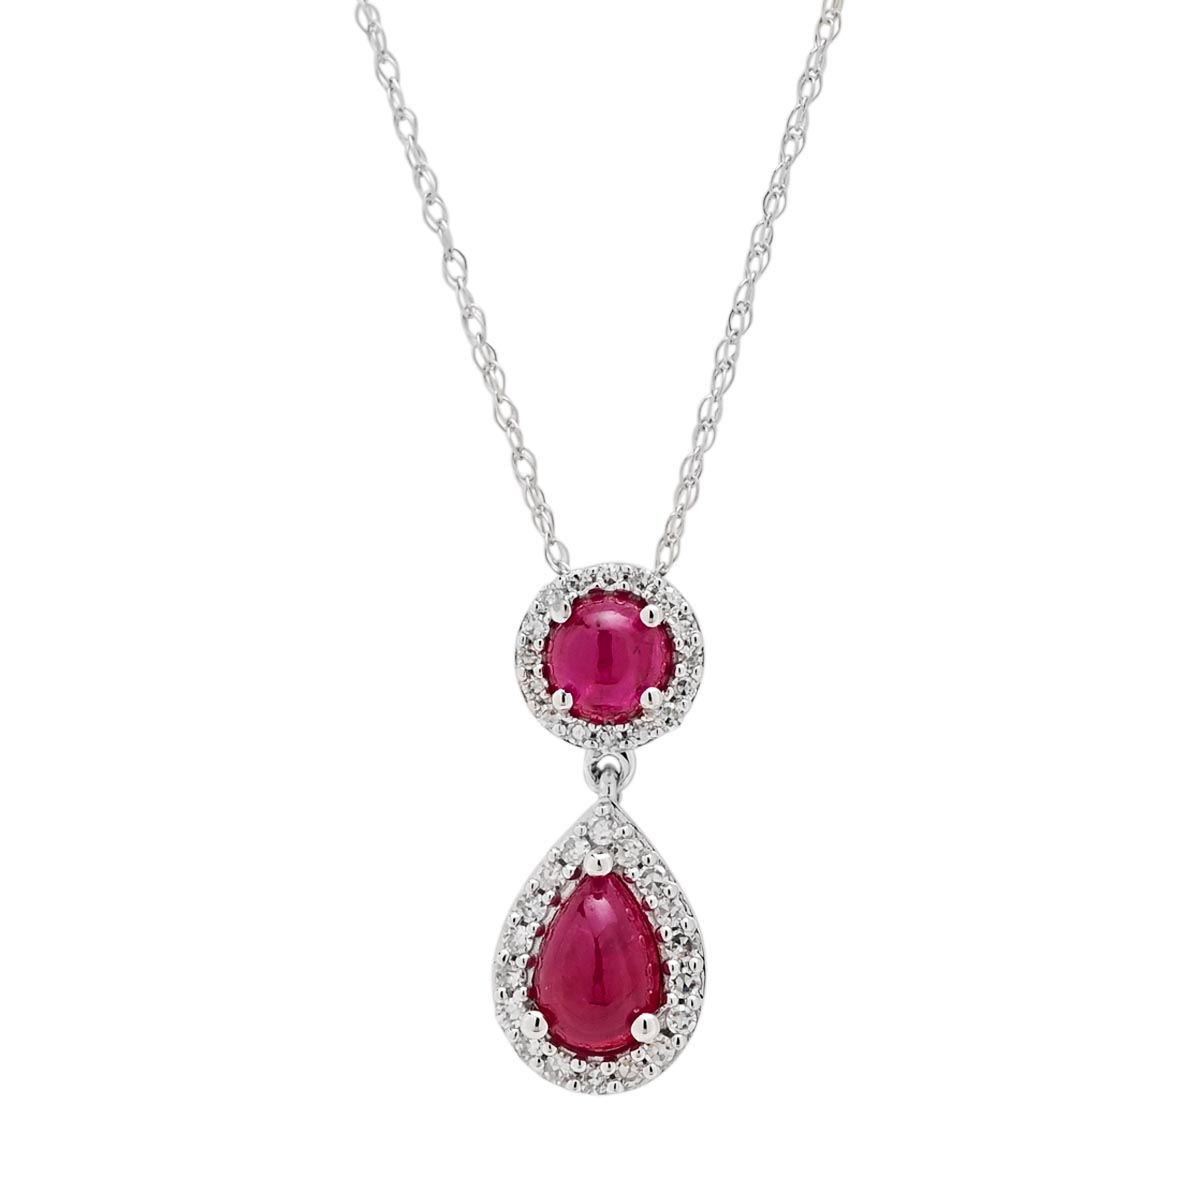 Greenland Ruby Necklace in 10kt White Gold with Diamonds (1/7ct tw)